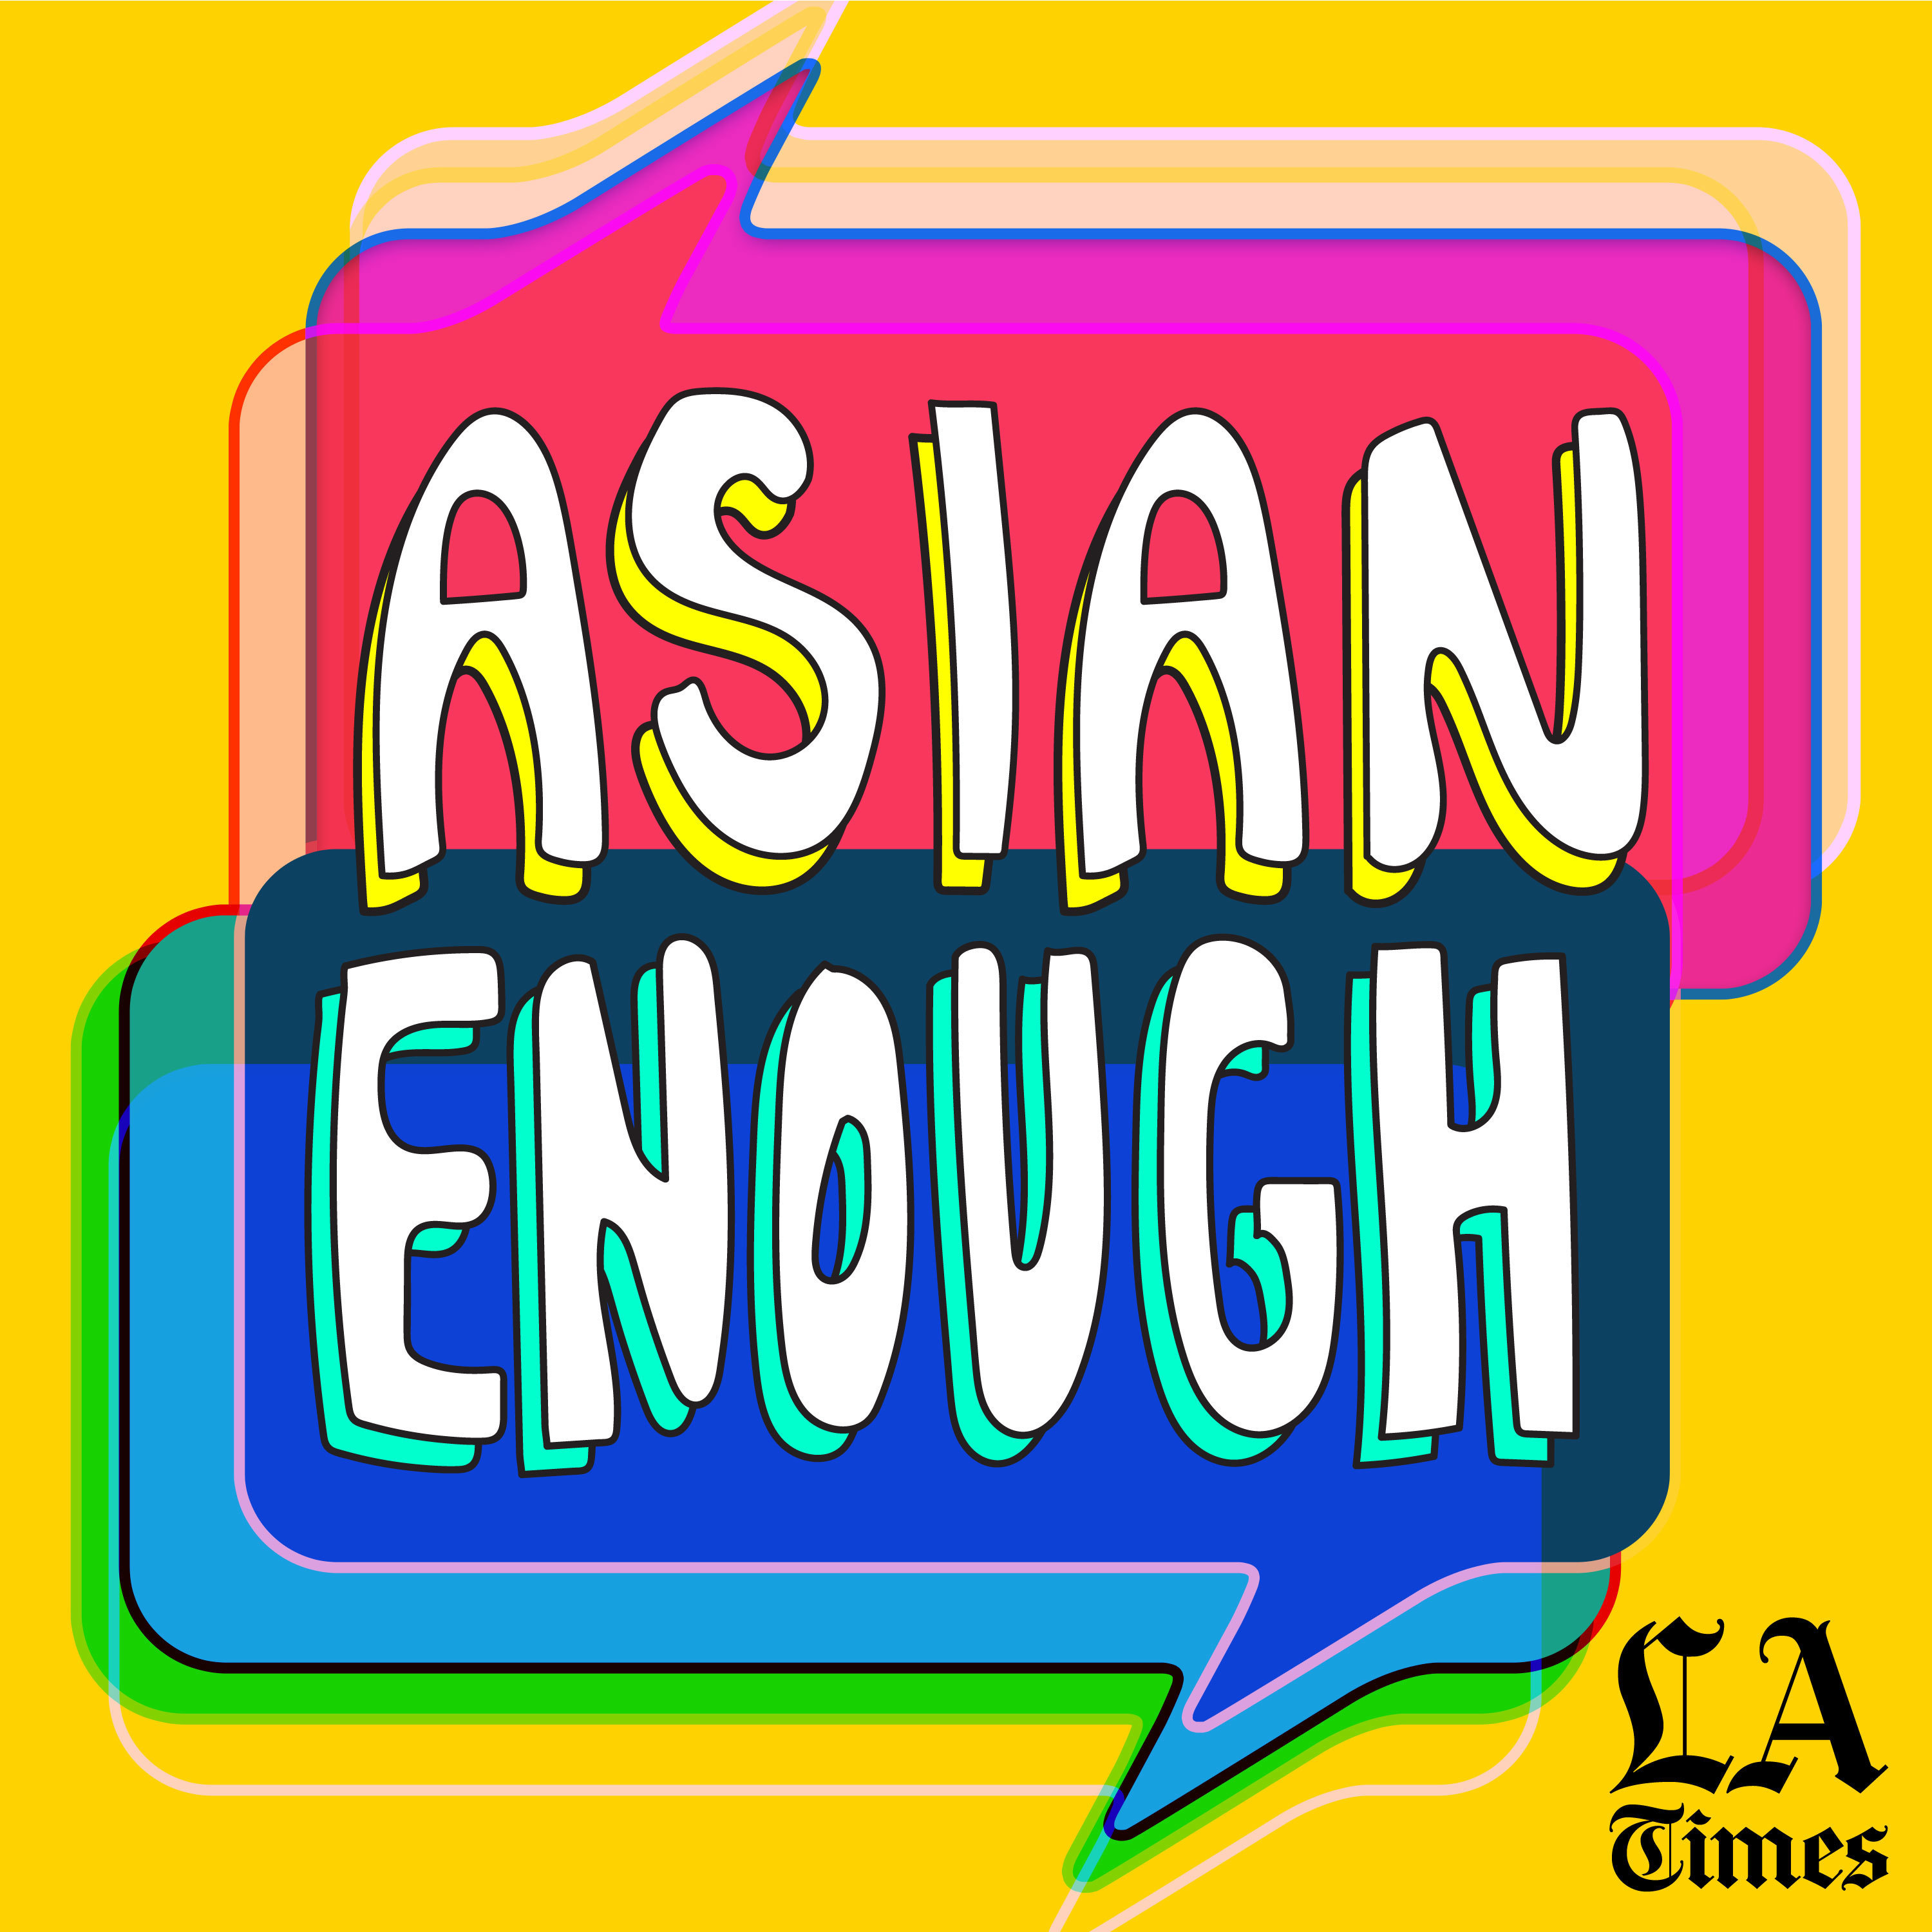 Asian Enough introduces: It's Been a Minute with Sam Sanders and Guest Hasan Minhaj